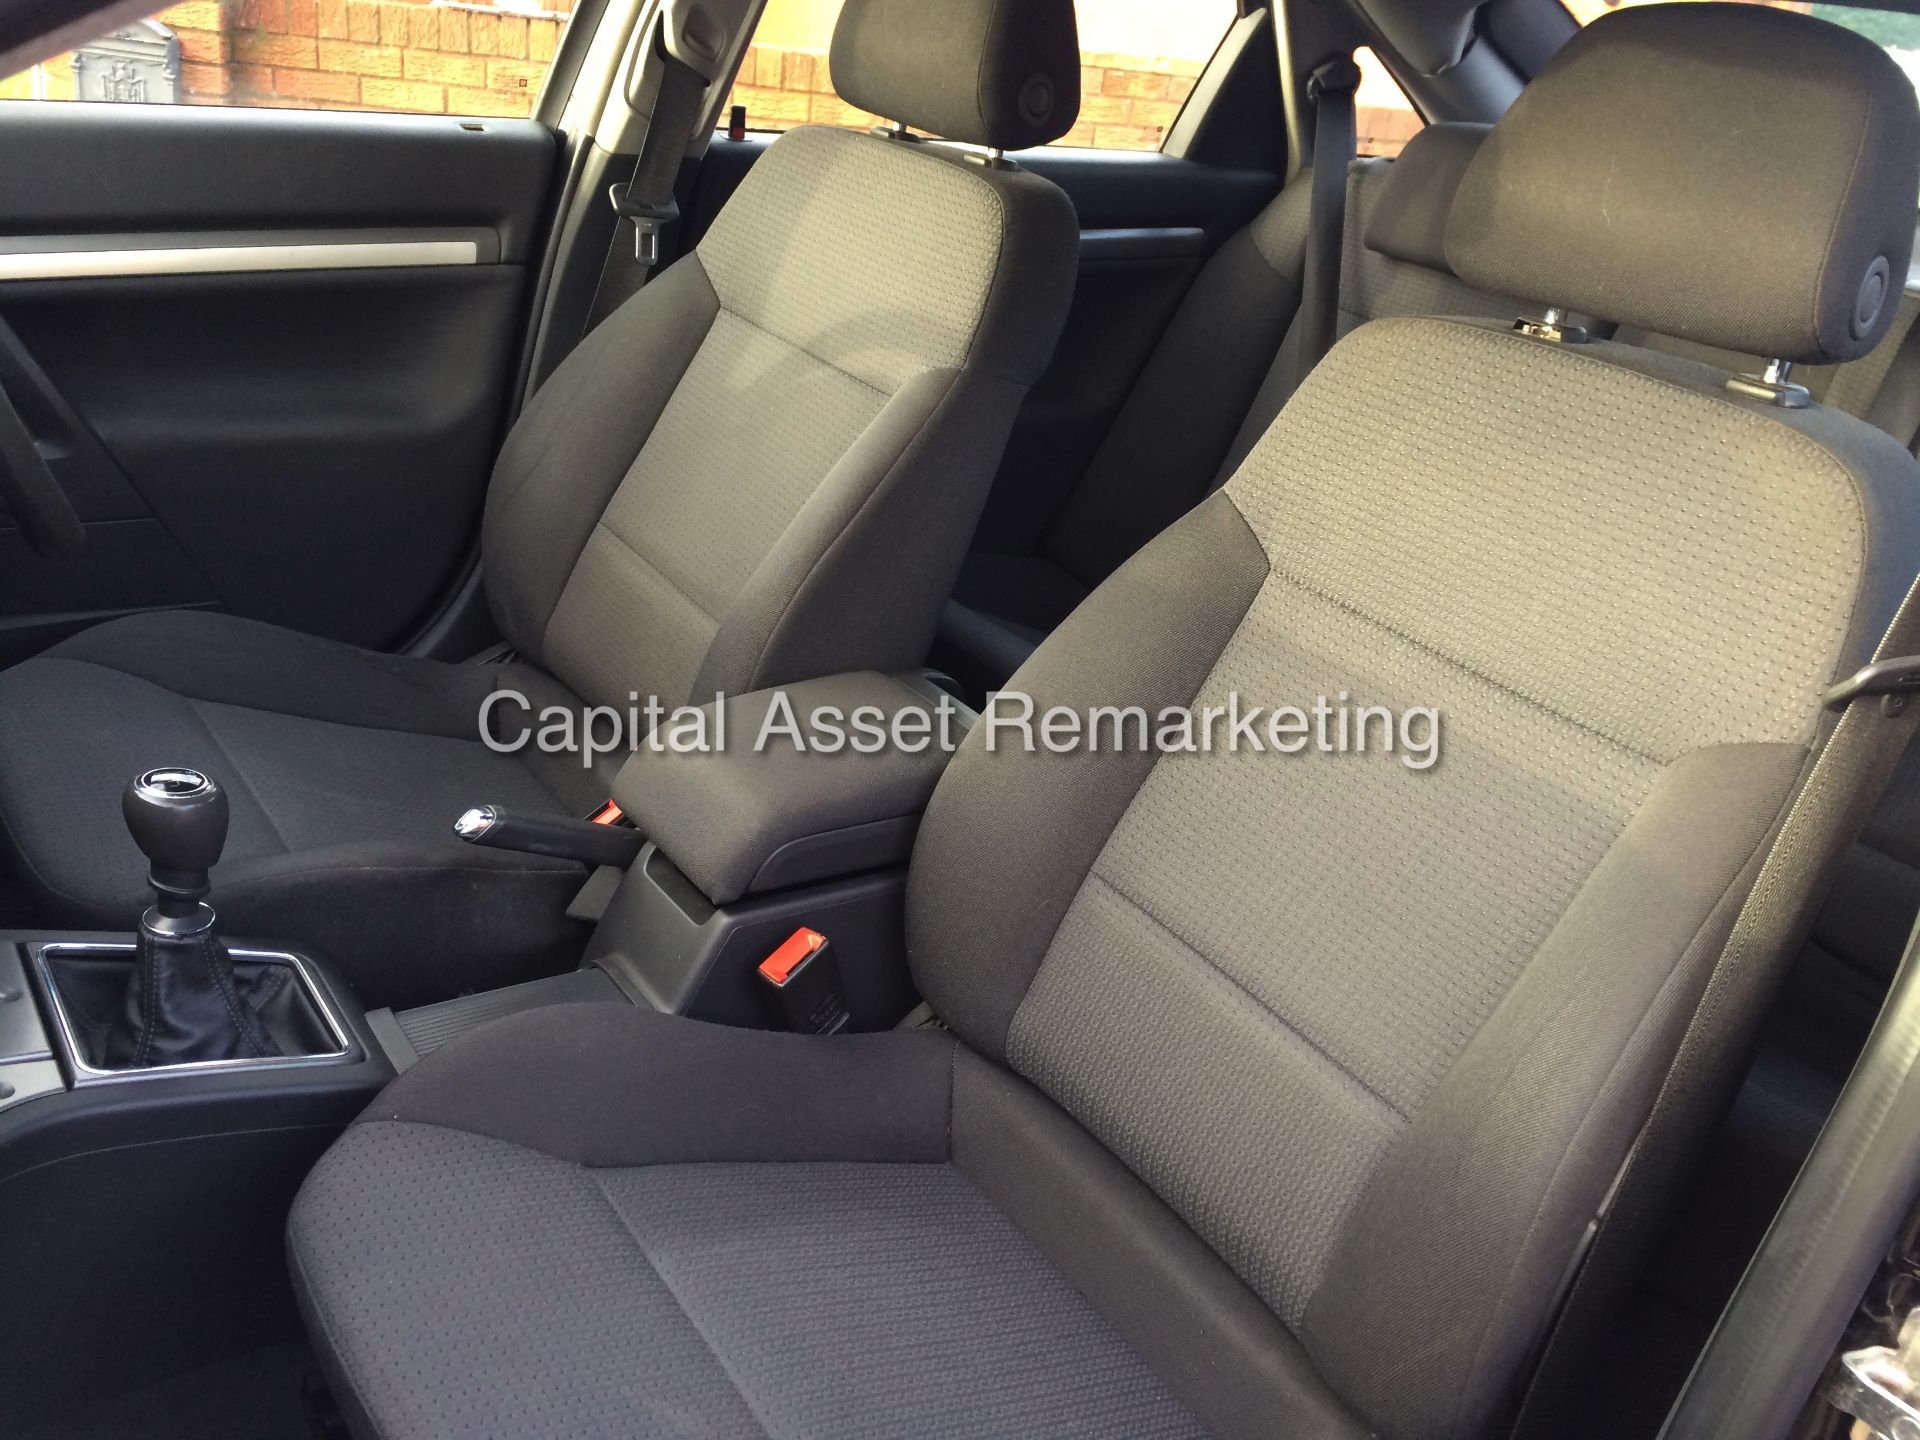 (On Sale) VAUXHALL VECTRA 1.9CDTI '150' 6 SPEED (2008 - 08 REG) AIR CON - ELEC PACK - NO VAT - Image 15 of 23